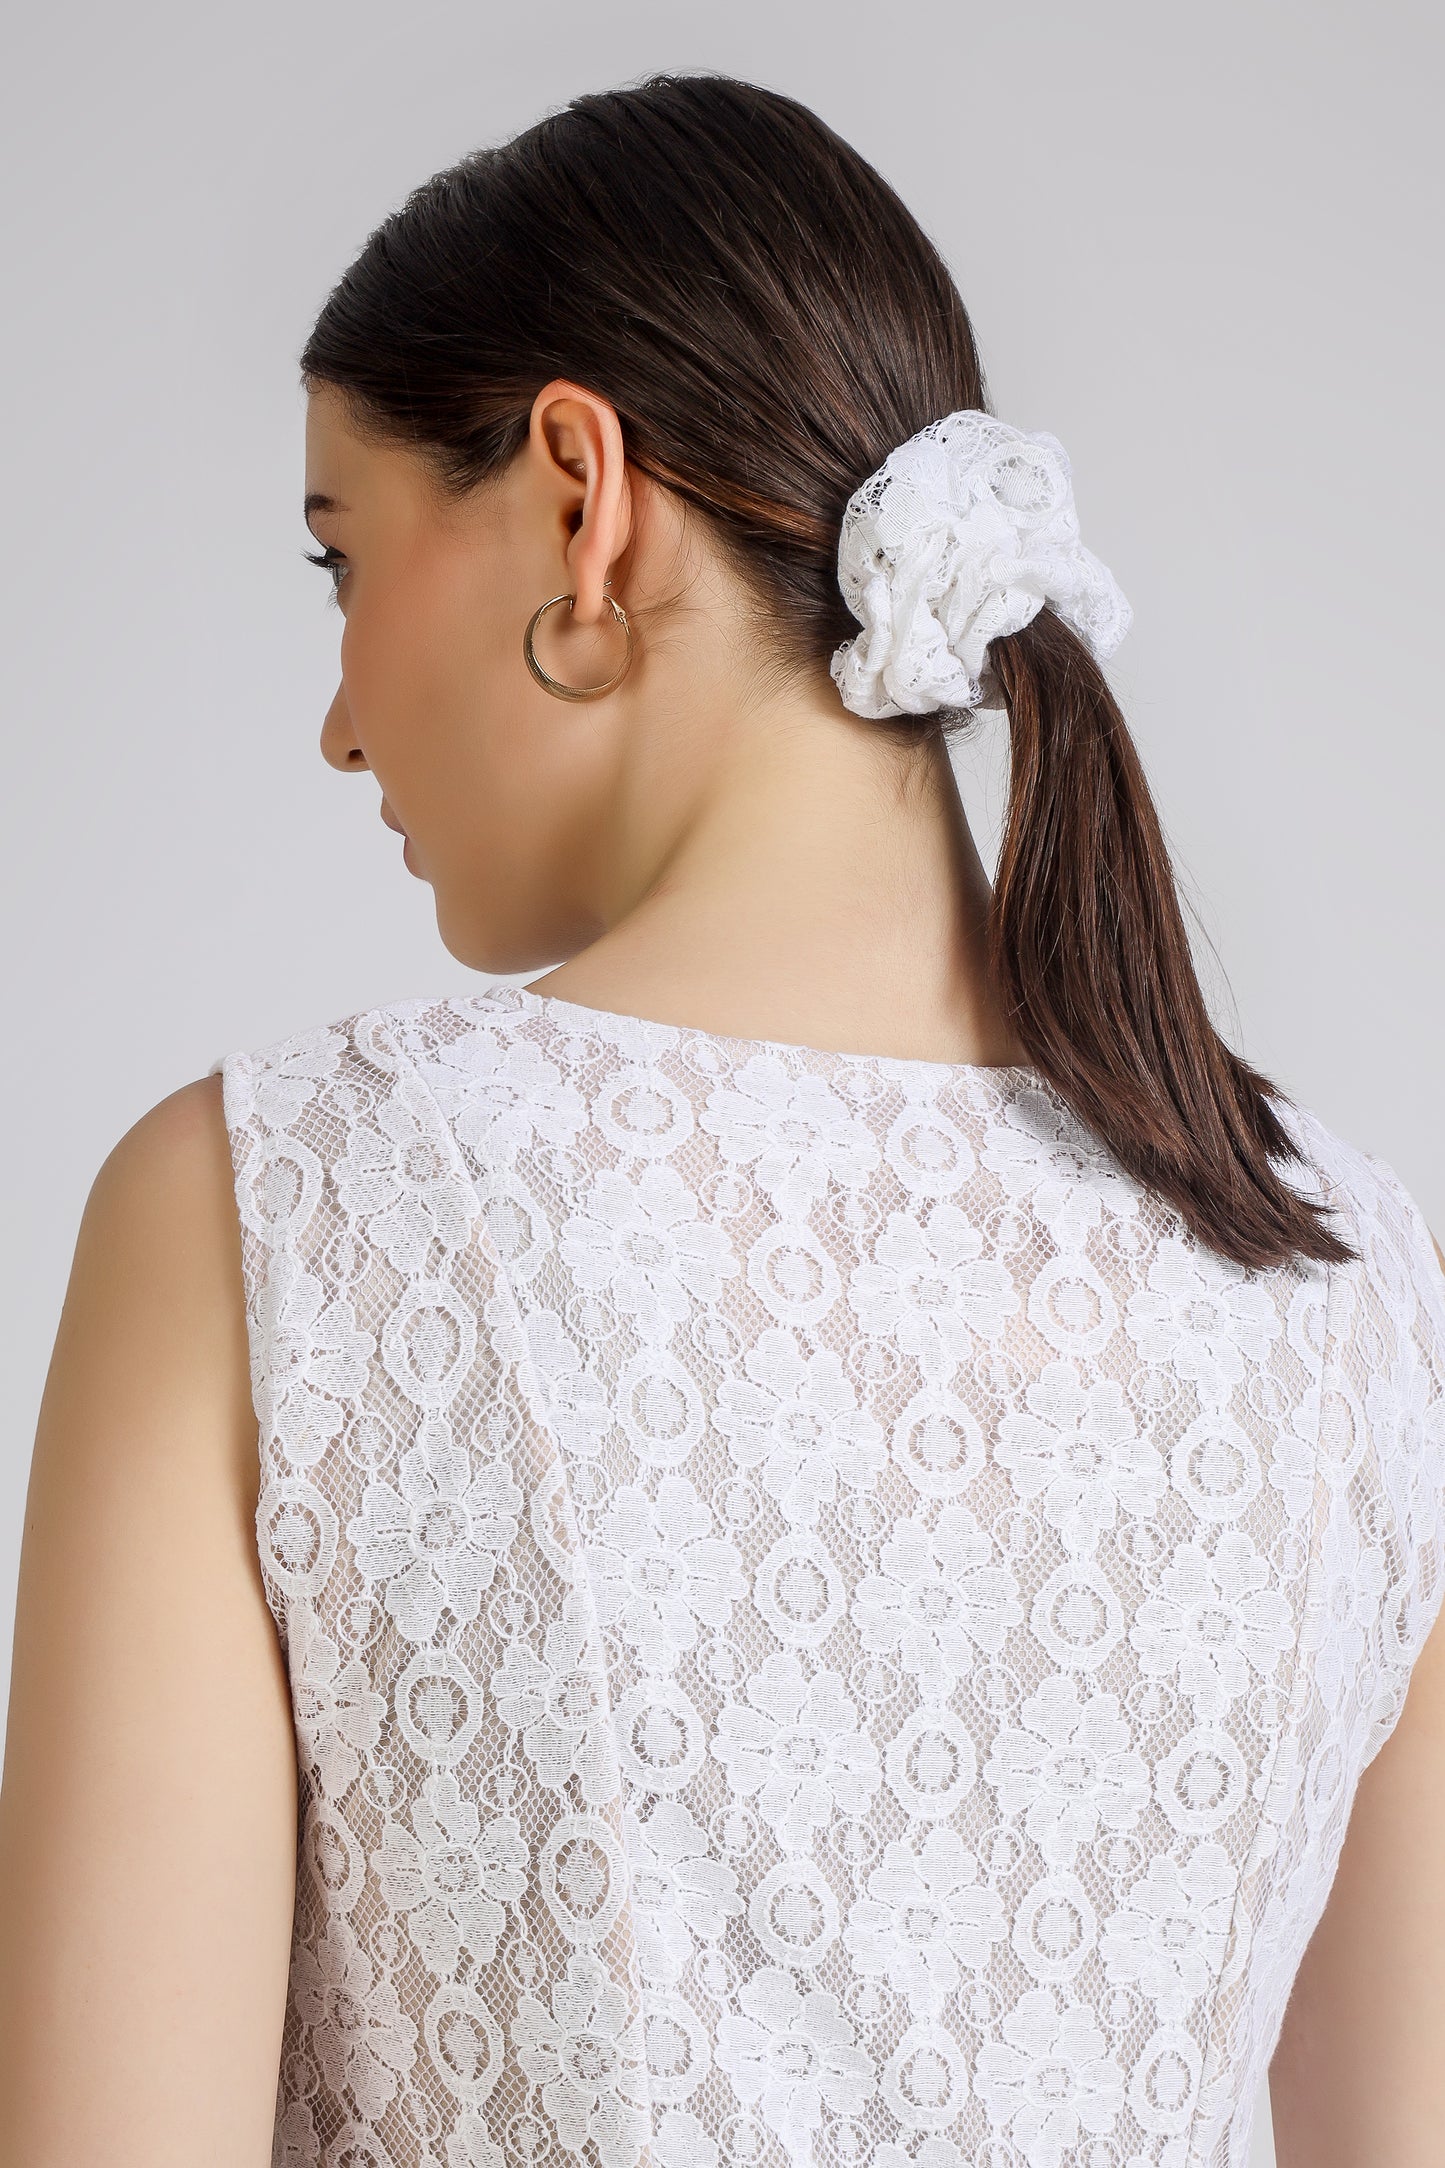 Vomendi White Lace Work Bodycon Dress with Princess Seam and Cut Sleeves